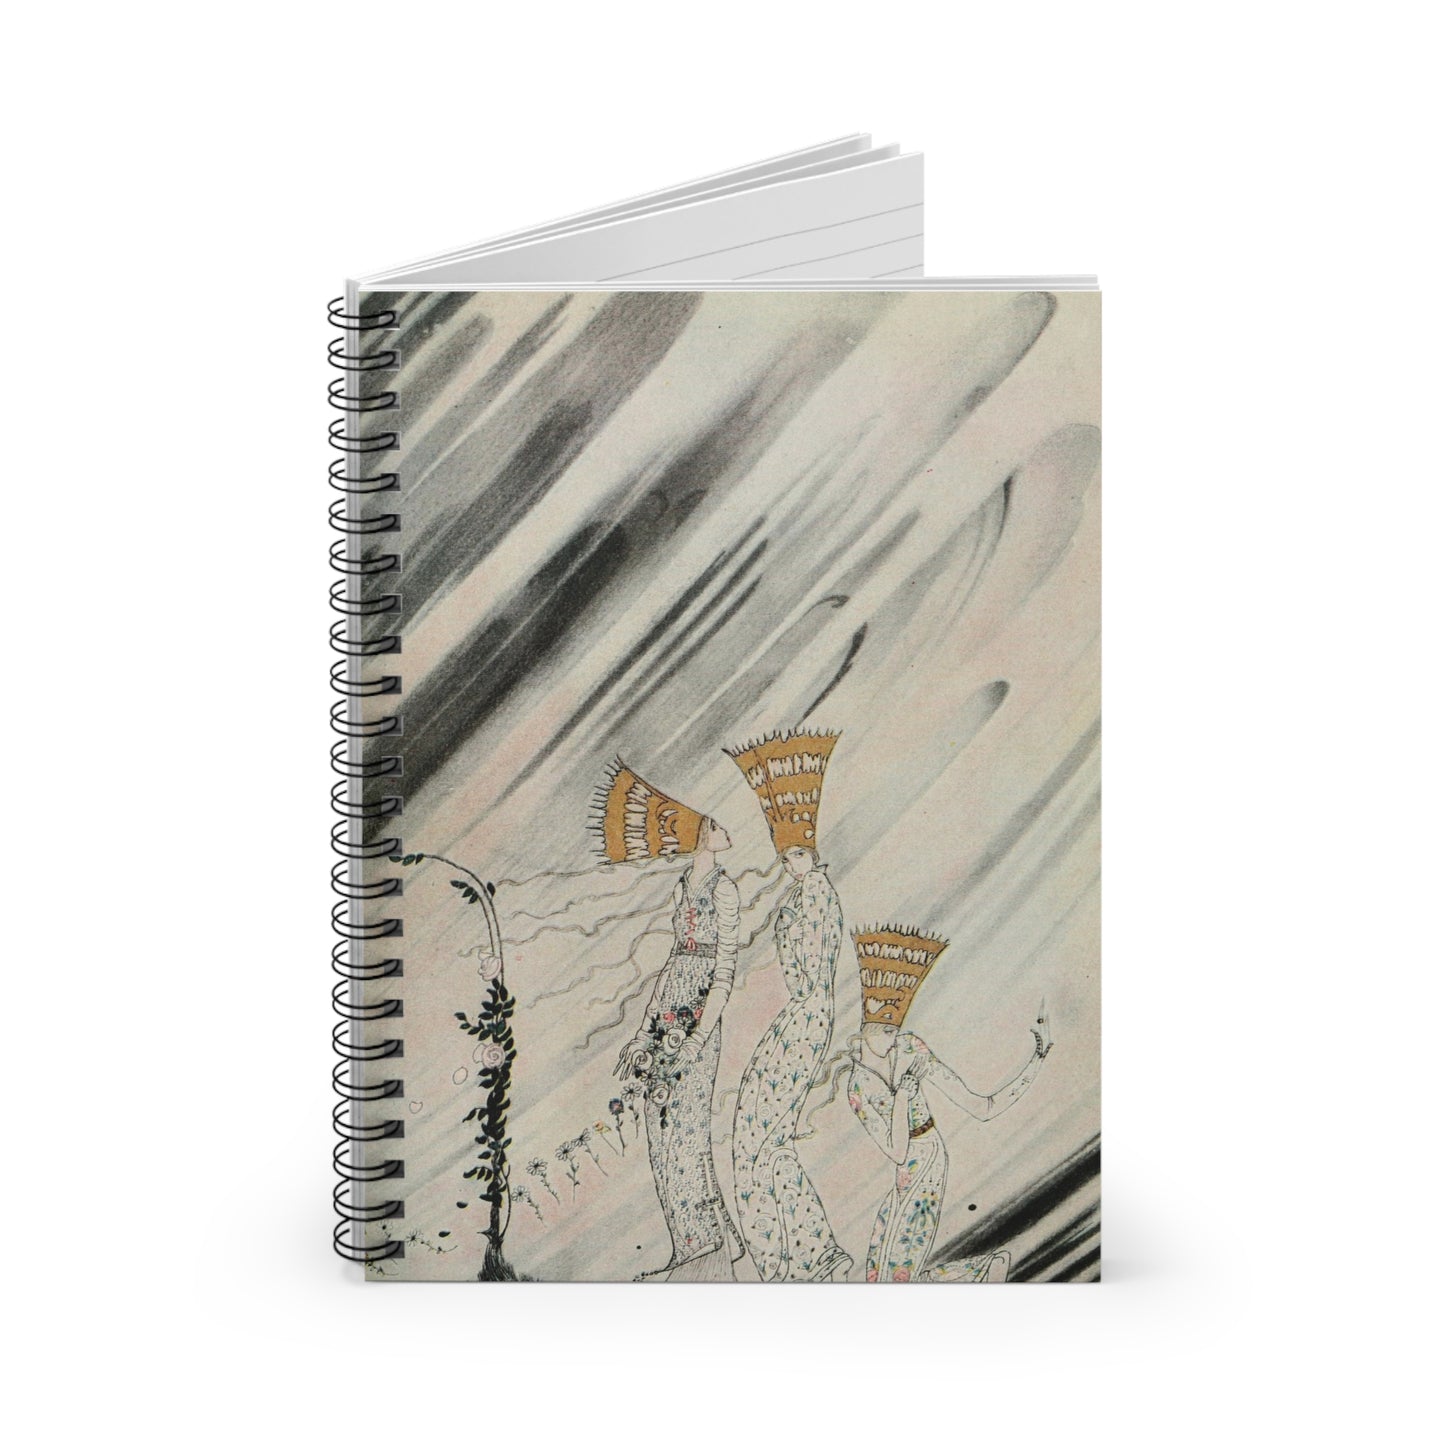 KAY RASMUS NIELSEN - EAST OF THE SUN AND WEST OF THE MOON  (pl 22) - SPIRAL ART NOTEBOOK